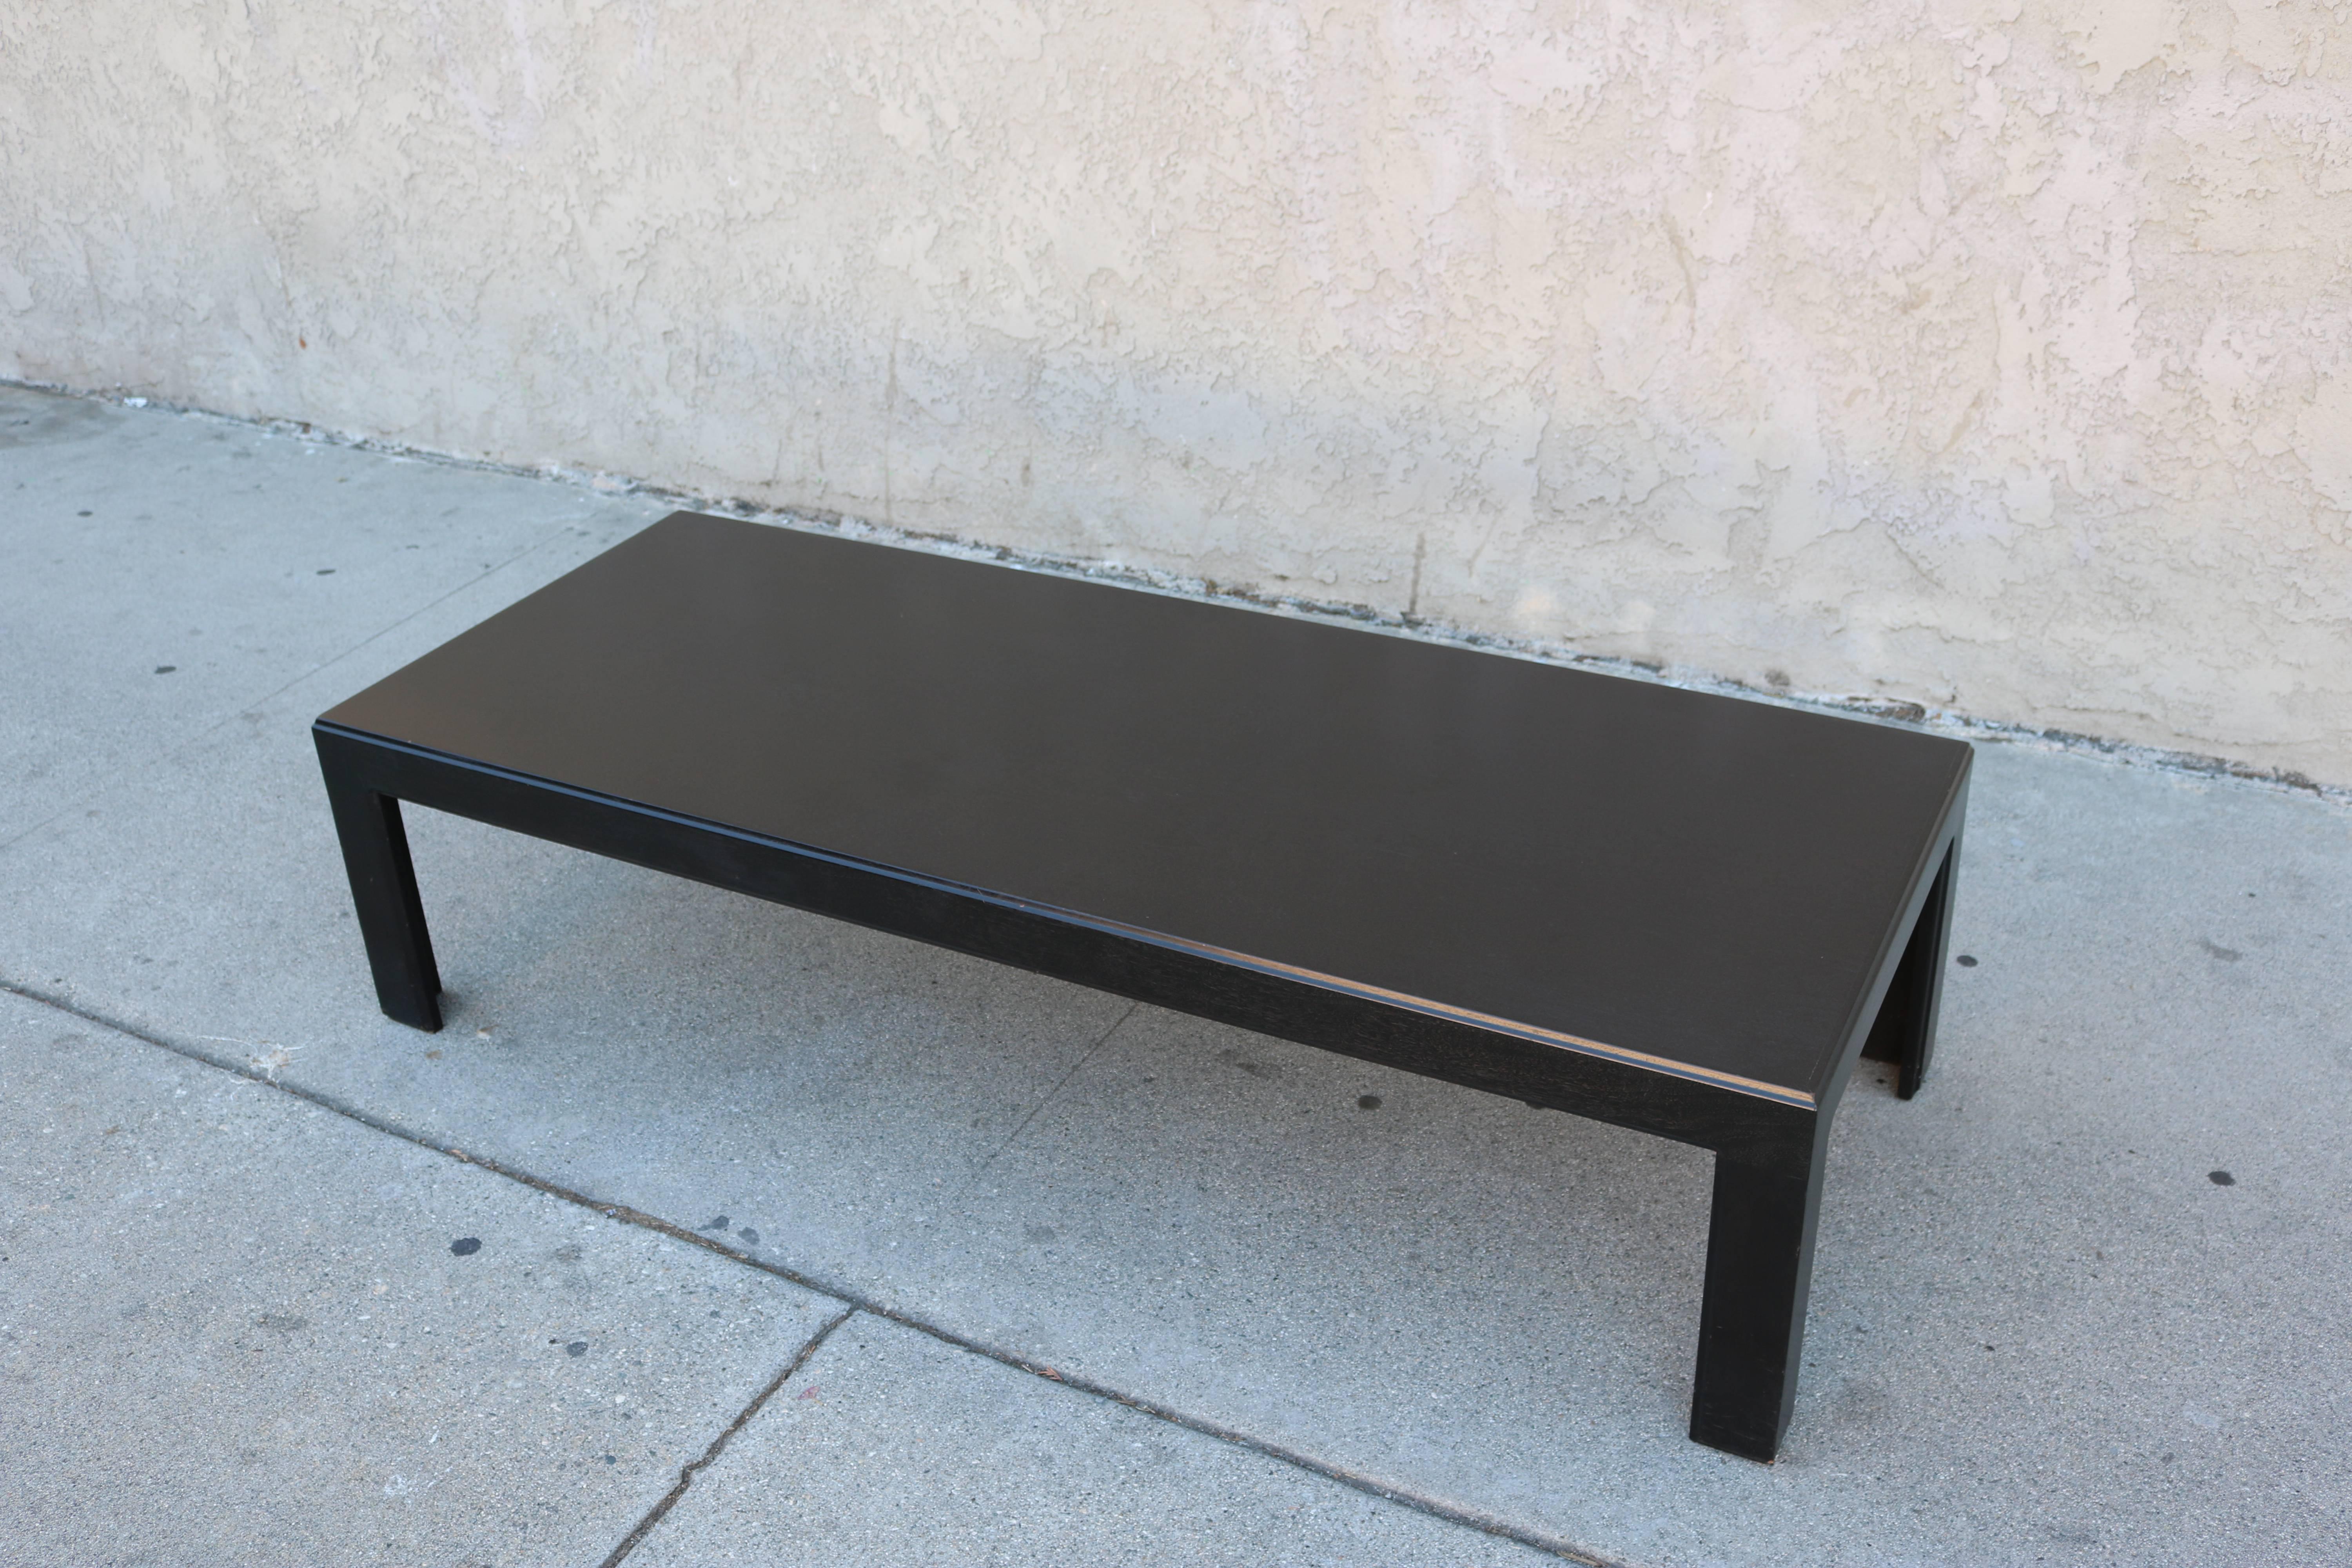 This black stained coffee table features very sleek lines and could fit in any kind of interiors.